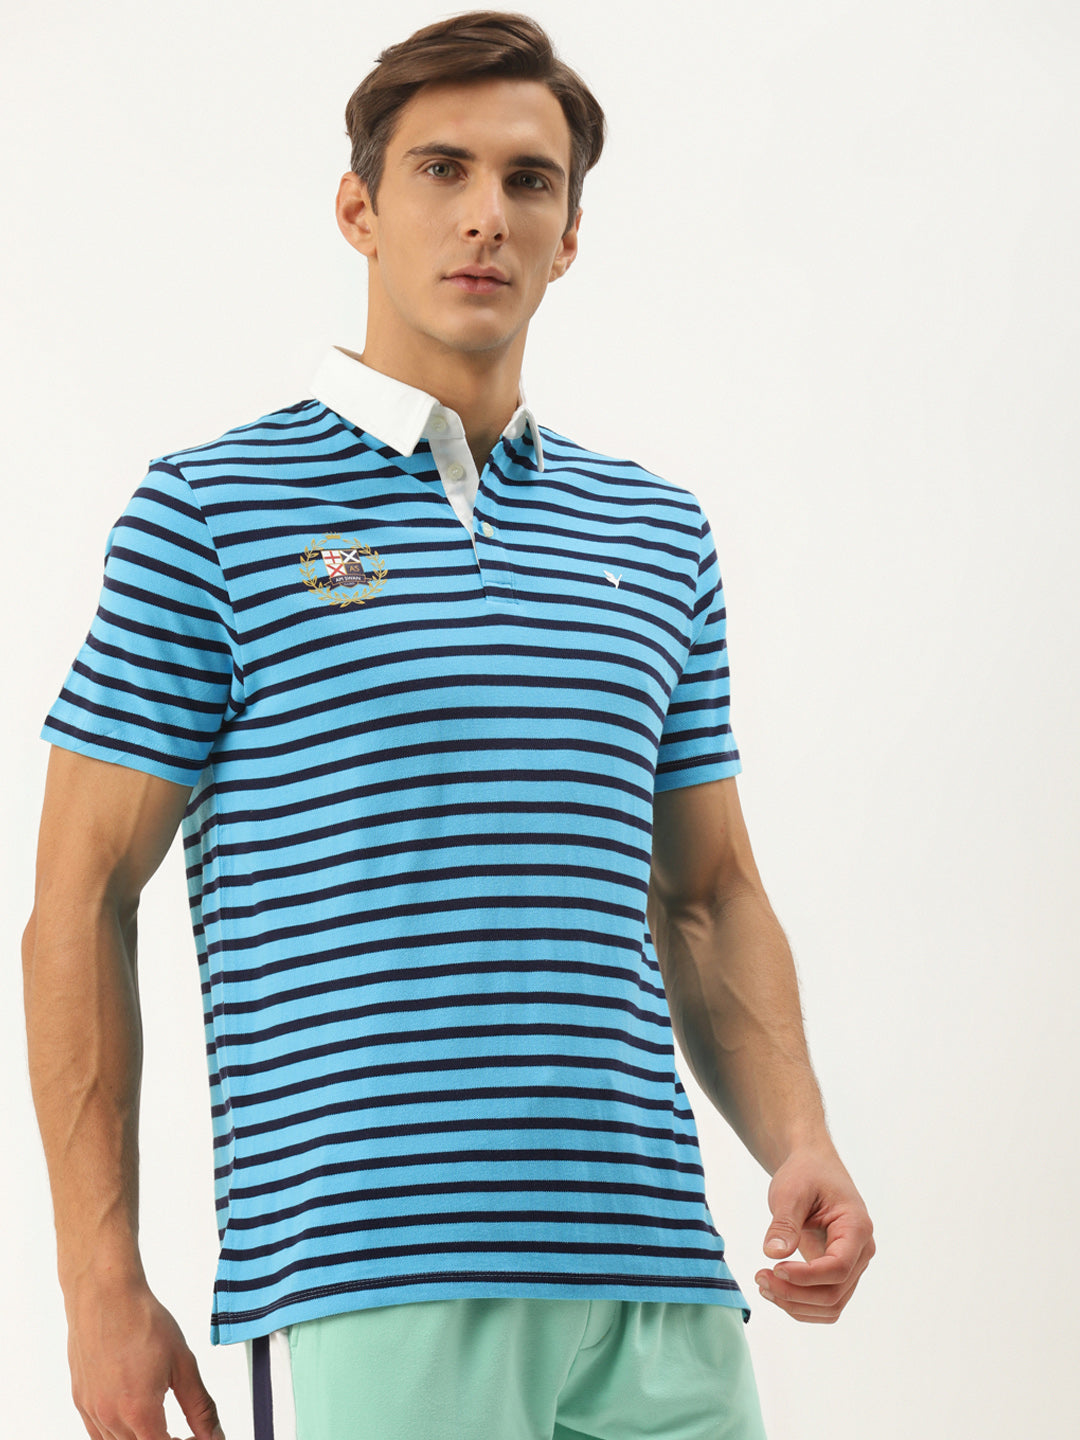 Men's Collar T-Shirts with Stripes in Premium Cotton and Half Sleeves